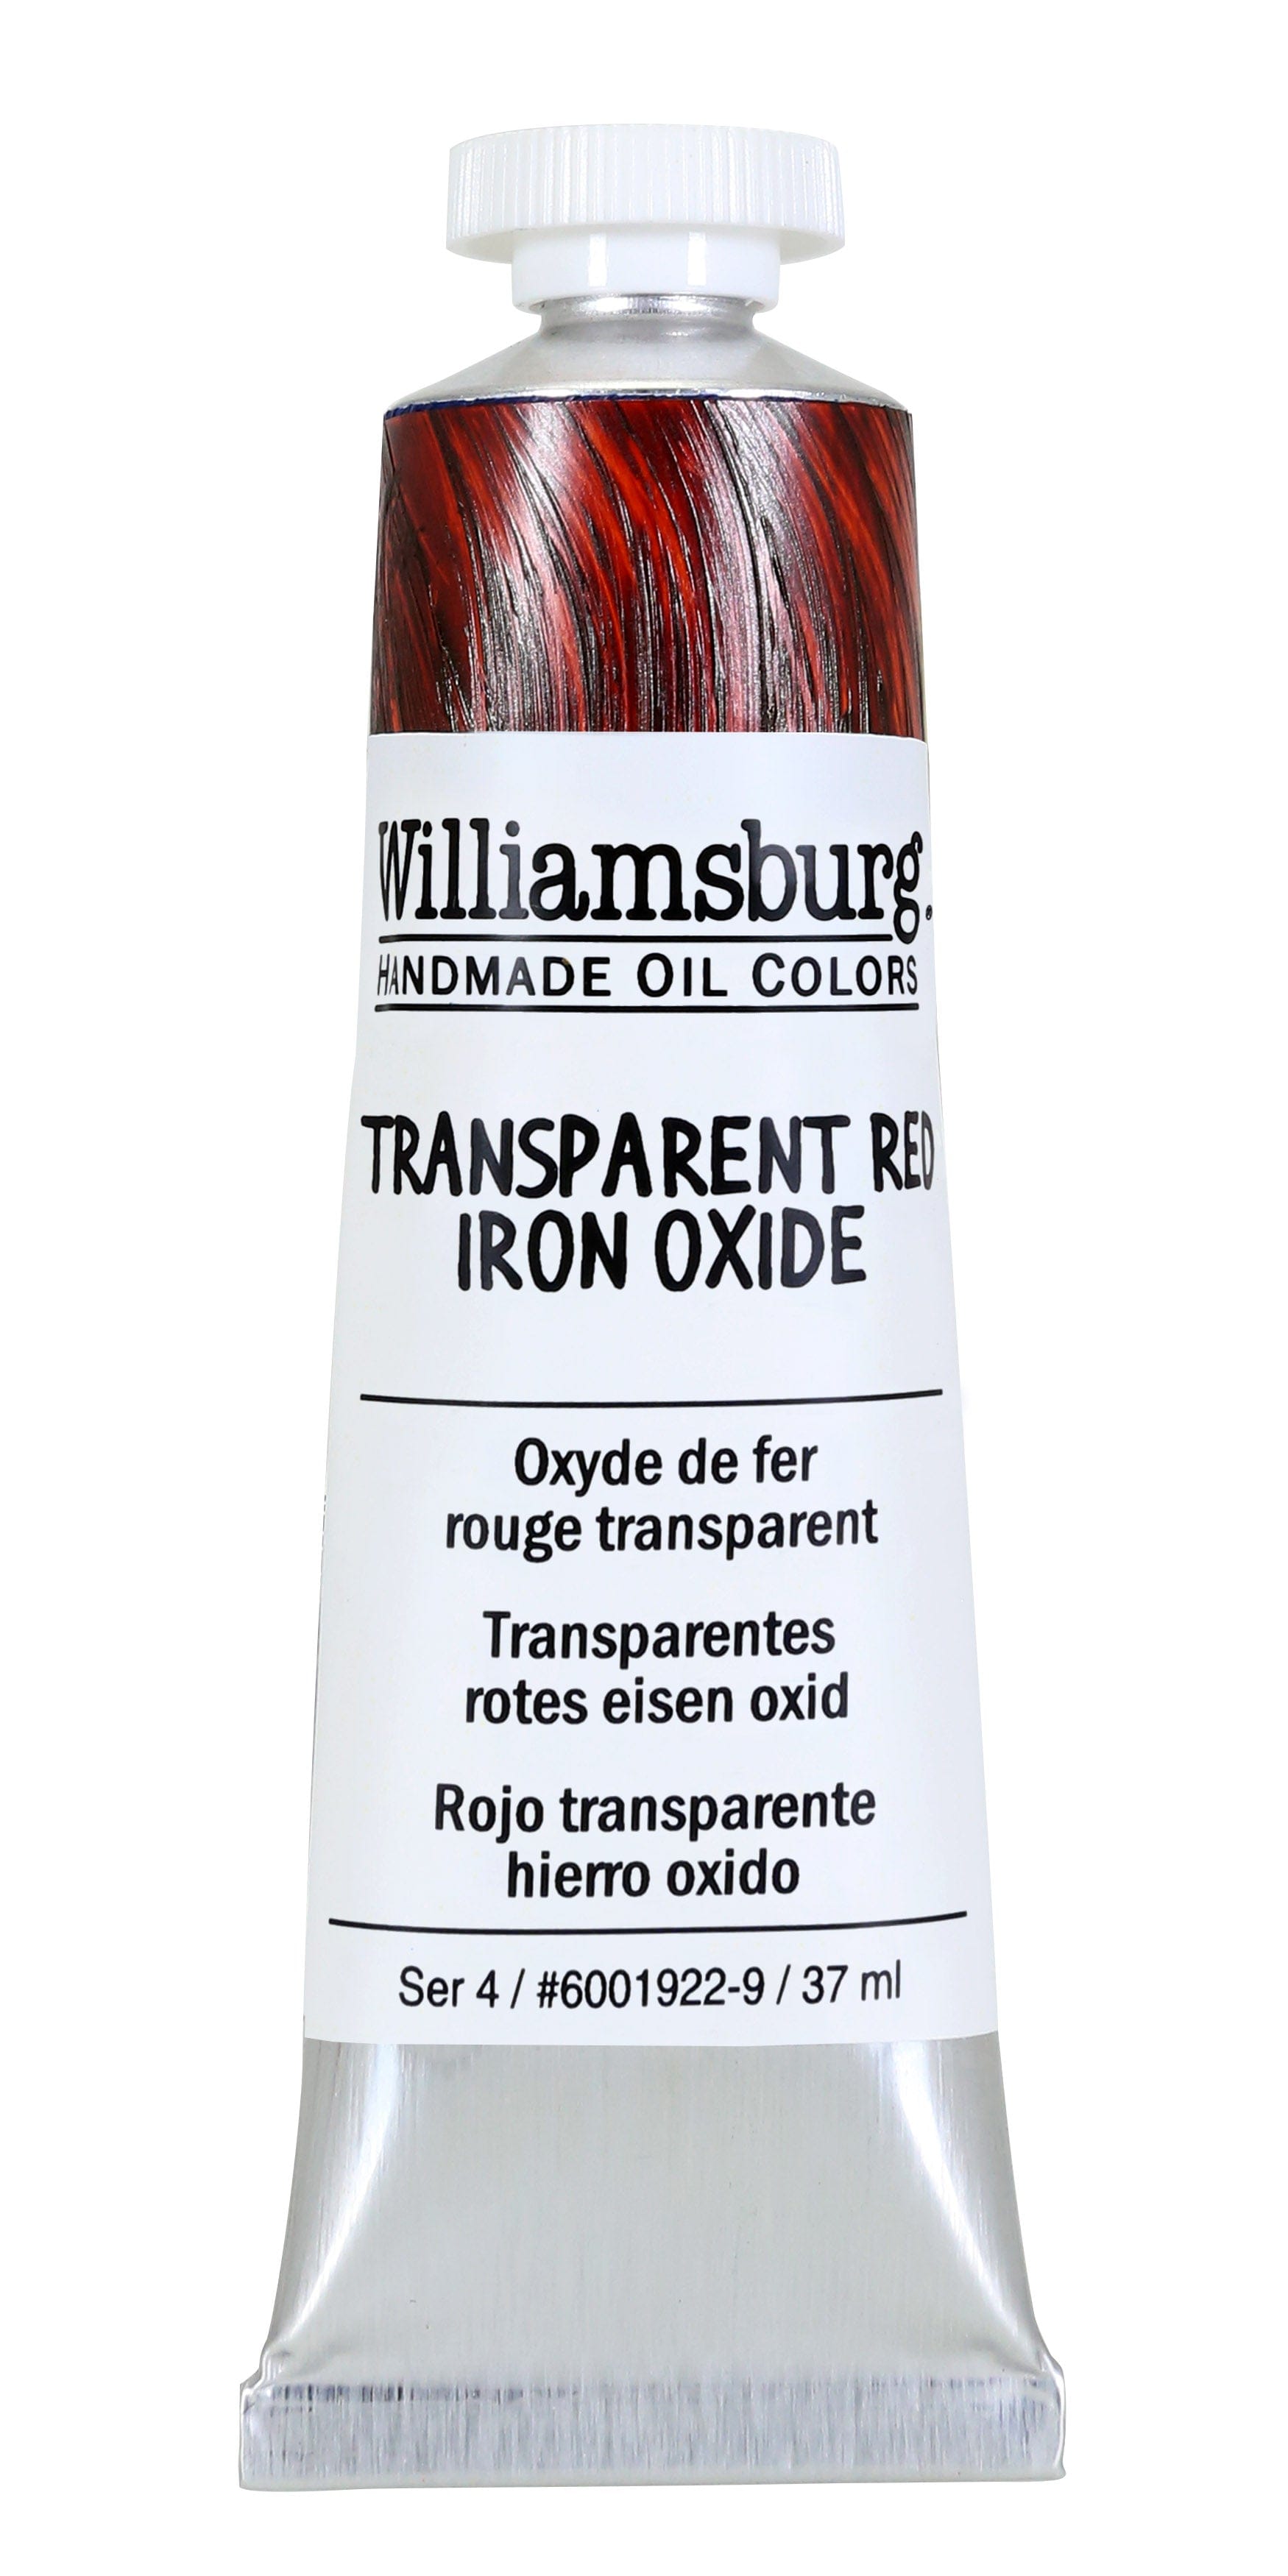 Williamsburg Oliemaling Transparent Red Iron Oxide